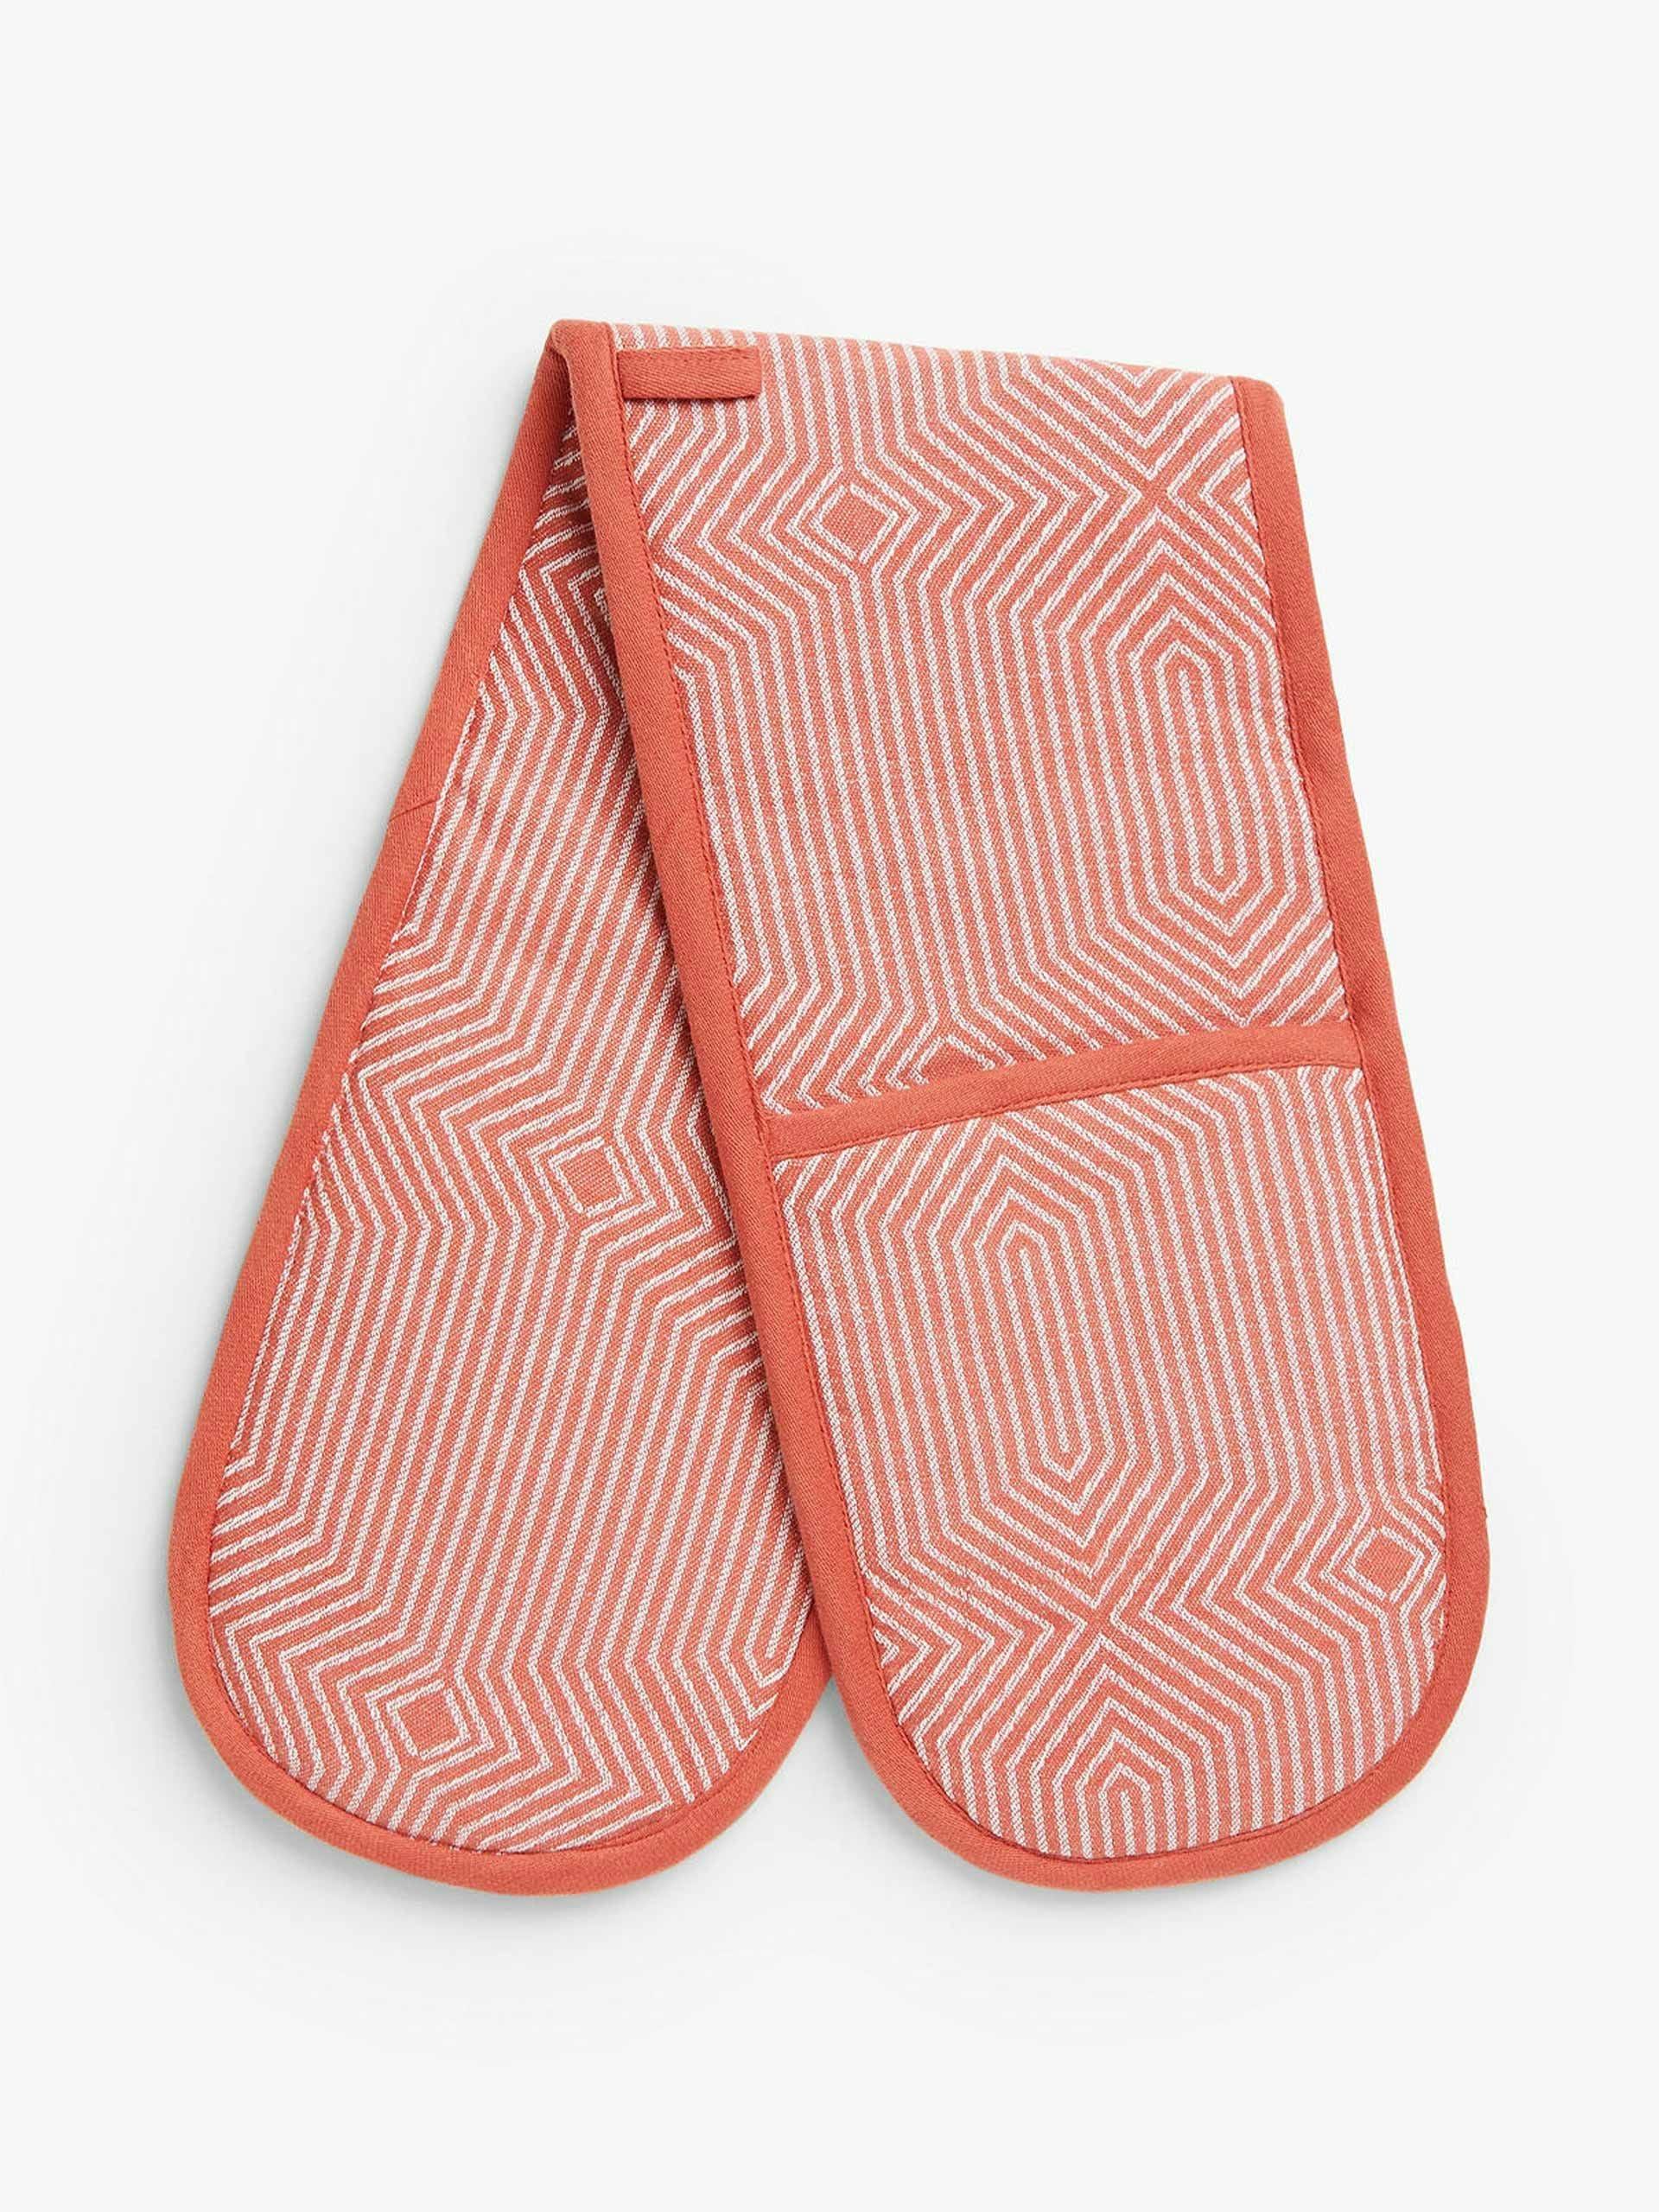 Patterned double oven glove